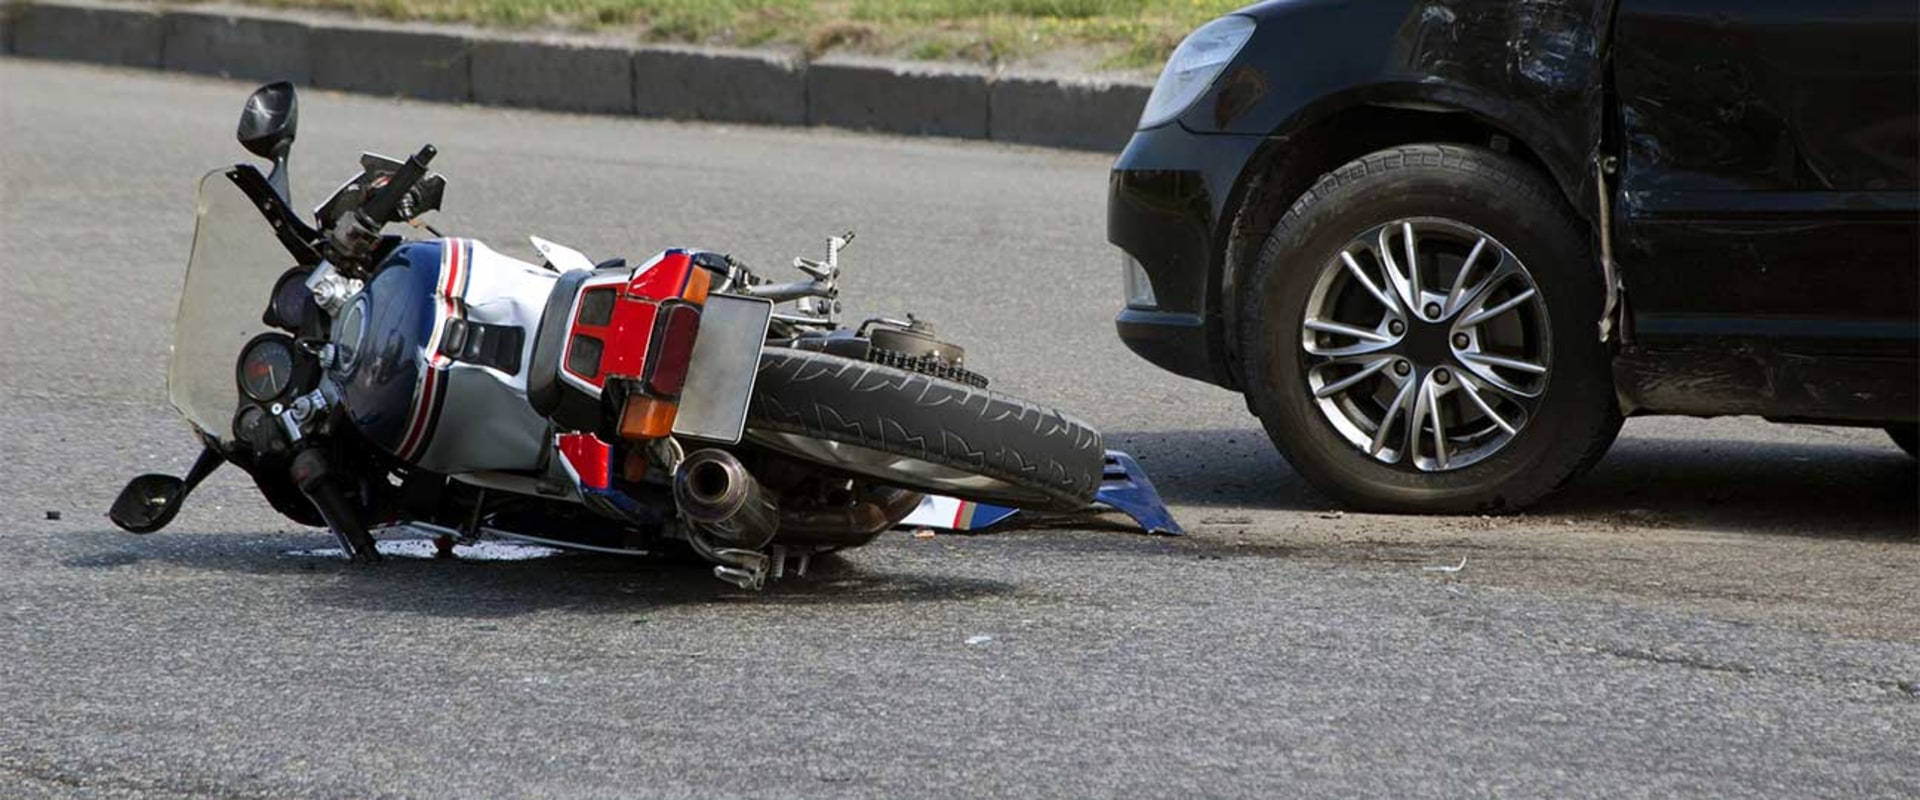 8 Benefits Of Hiring A Motorcycle Accident And Personal Injury Lawyer In Santa Rosa